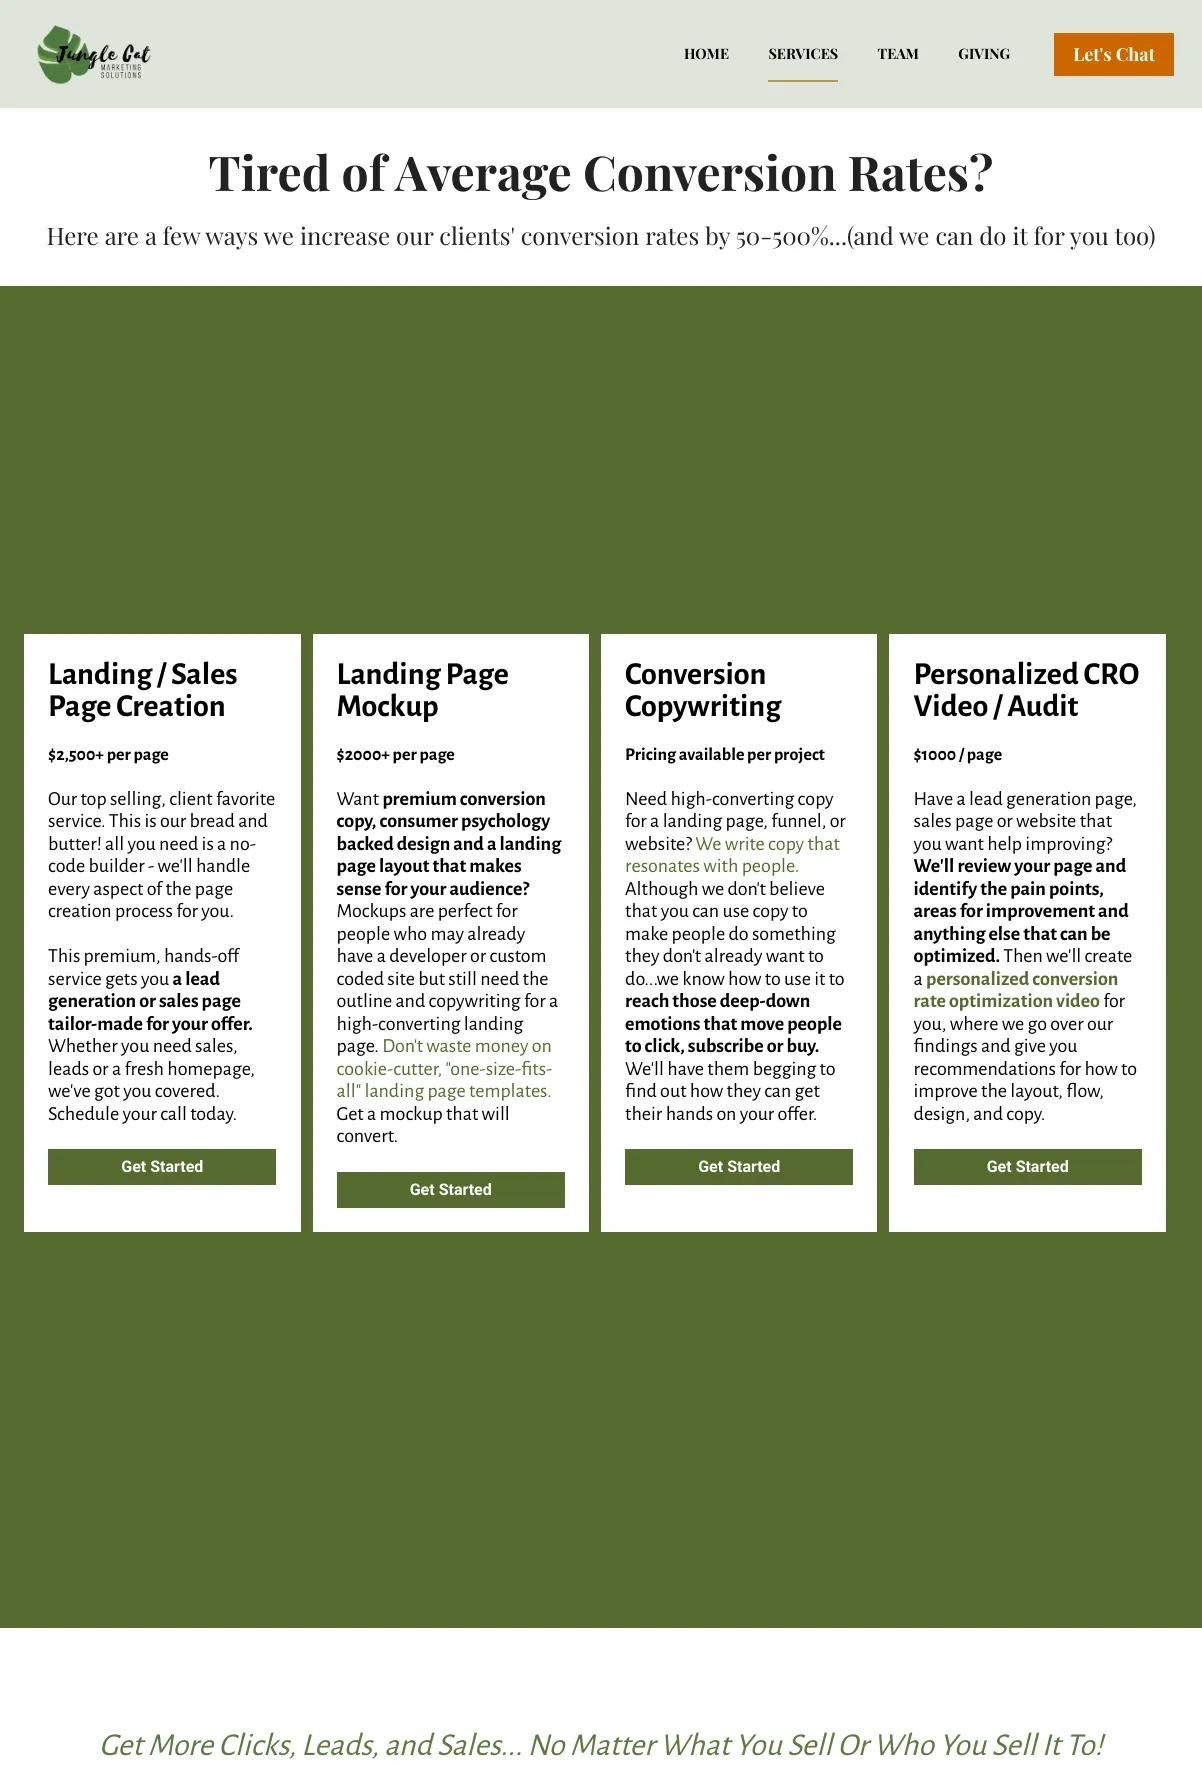 Screenshot 2 of Jungle Cat Marketing (Example Leadpages Website)